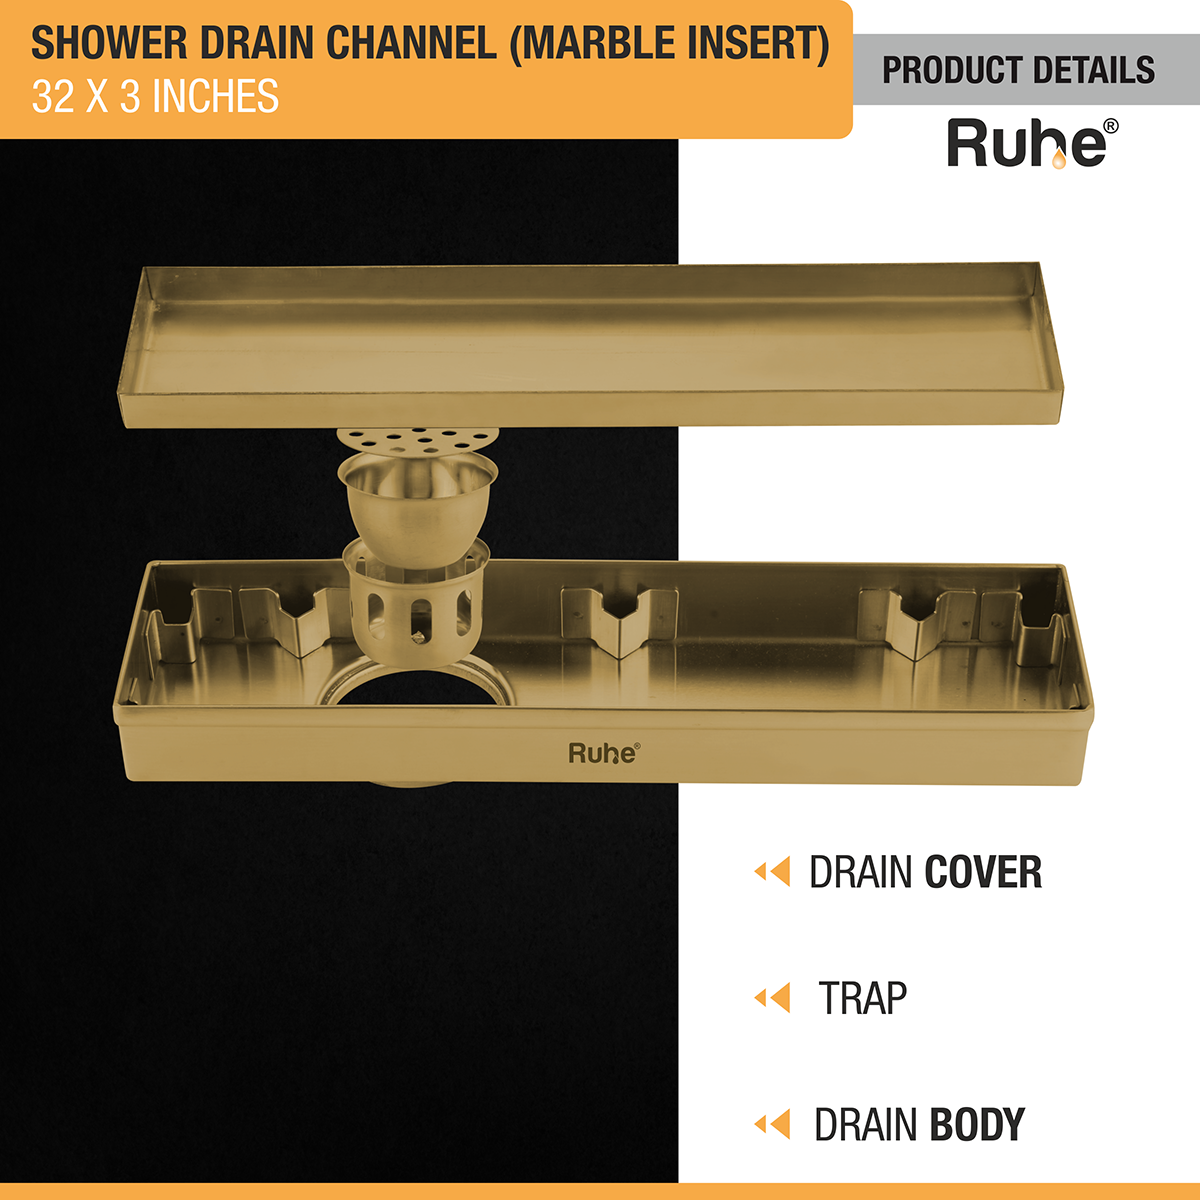 Marble Insert Shower Drain Channel (32 x 3 Inches) YELLOW GOLD PVD Coated with drain cover, trap, and drain body